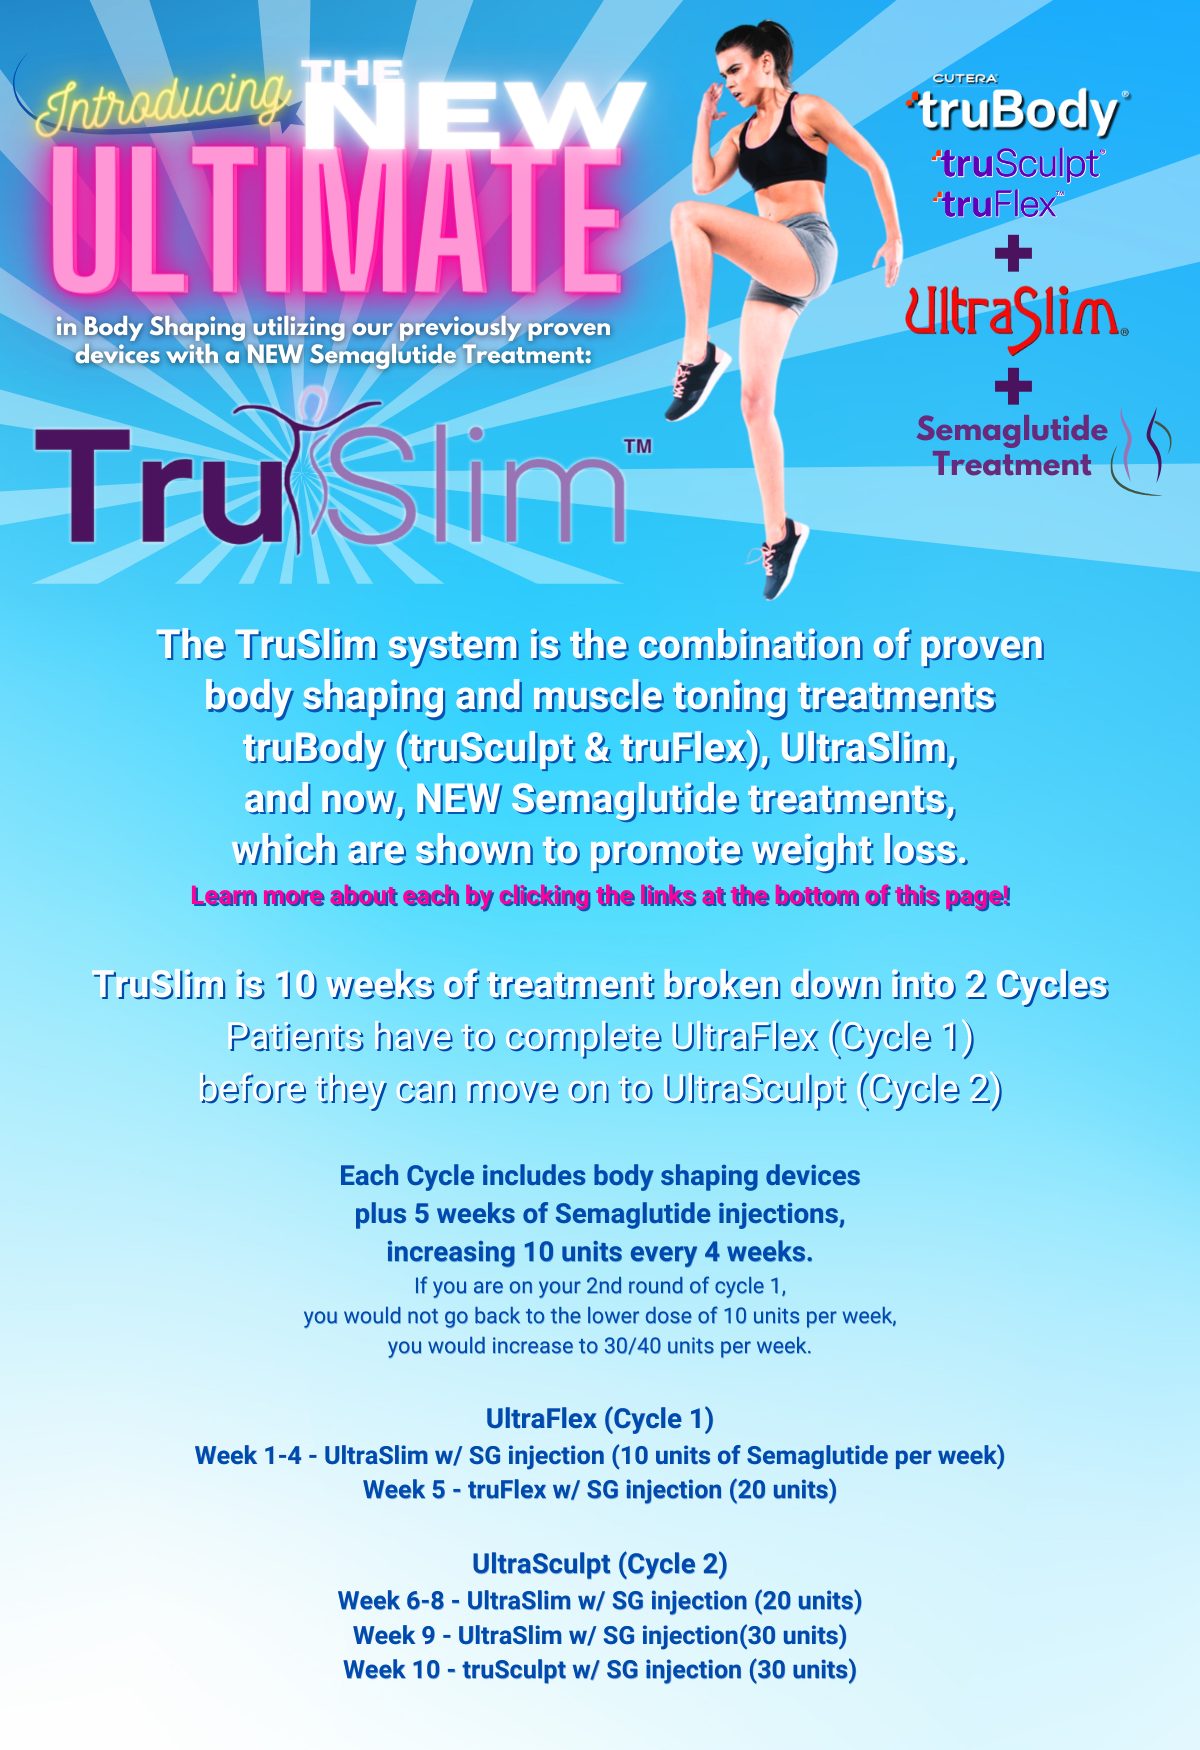 The TruSlim System is the combination of proven body shaping and muscle toning treatments<br />
truBody (truSculpt & truFlex), UltraSlim,<br />
and now, NEW Semaglutide treatments,<br />
which are shown to promote weight loss.